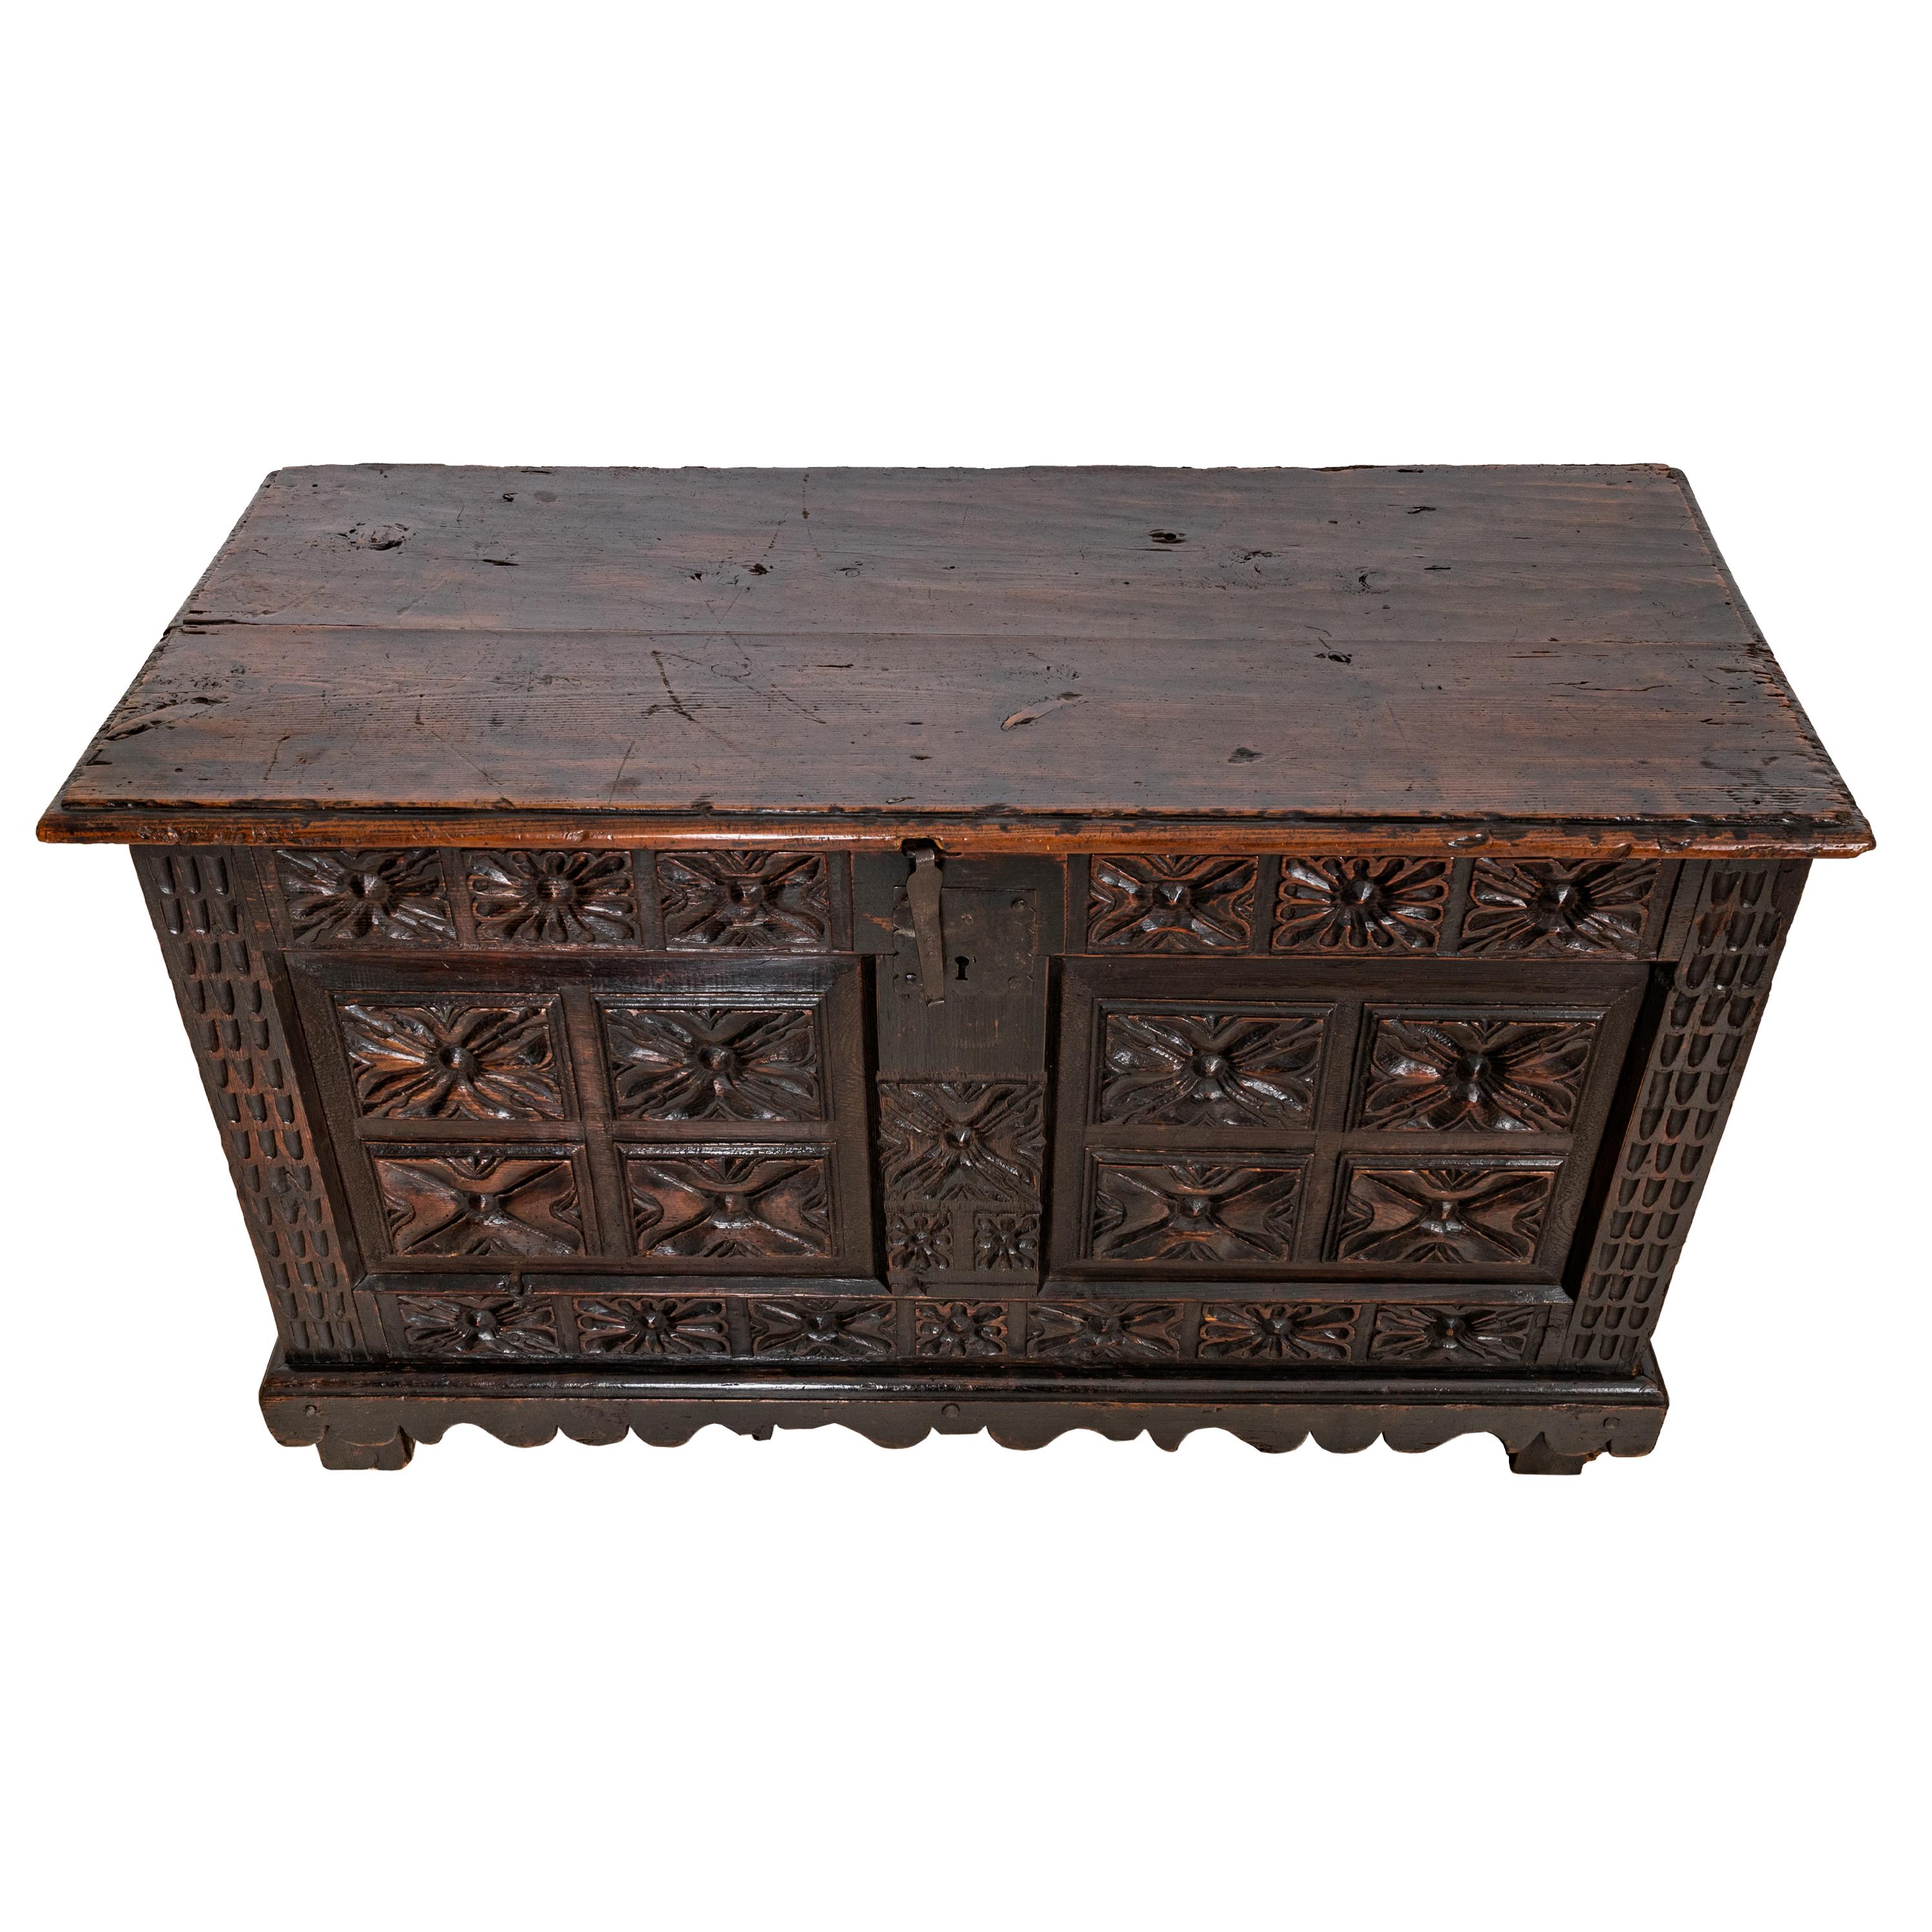 Antique 18th century Spanish Colonial carved cedar coffer/chest, Mexico, circa 1750.
The chest having a lift up lid with hand cut iron strap hinges, the chest is profusely chip-carved to the front with stylized floral panels and fitted with the